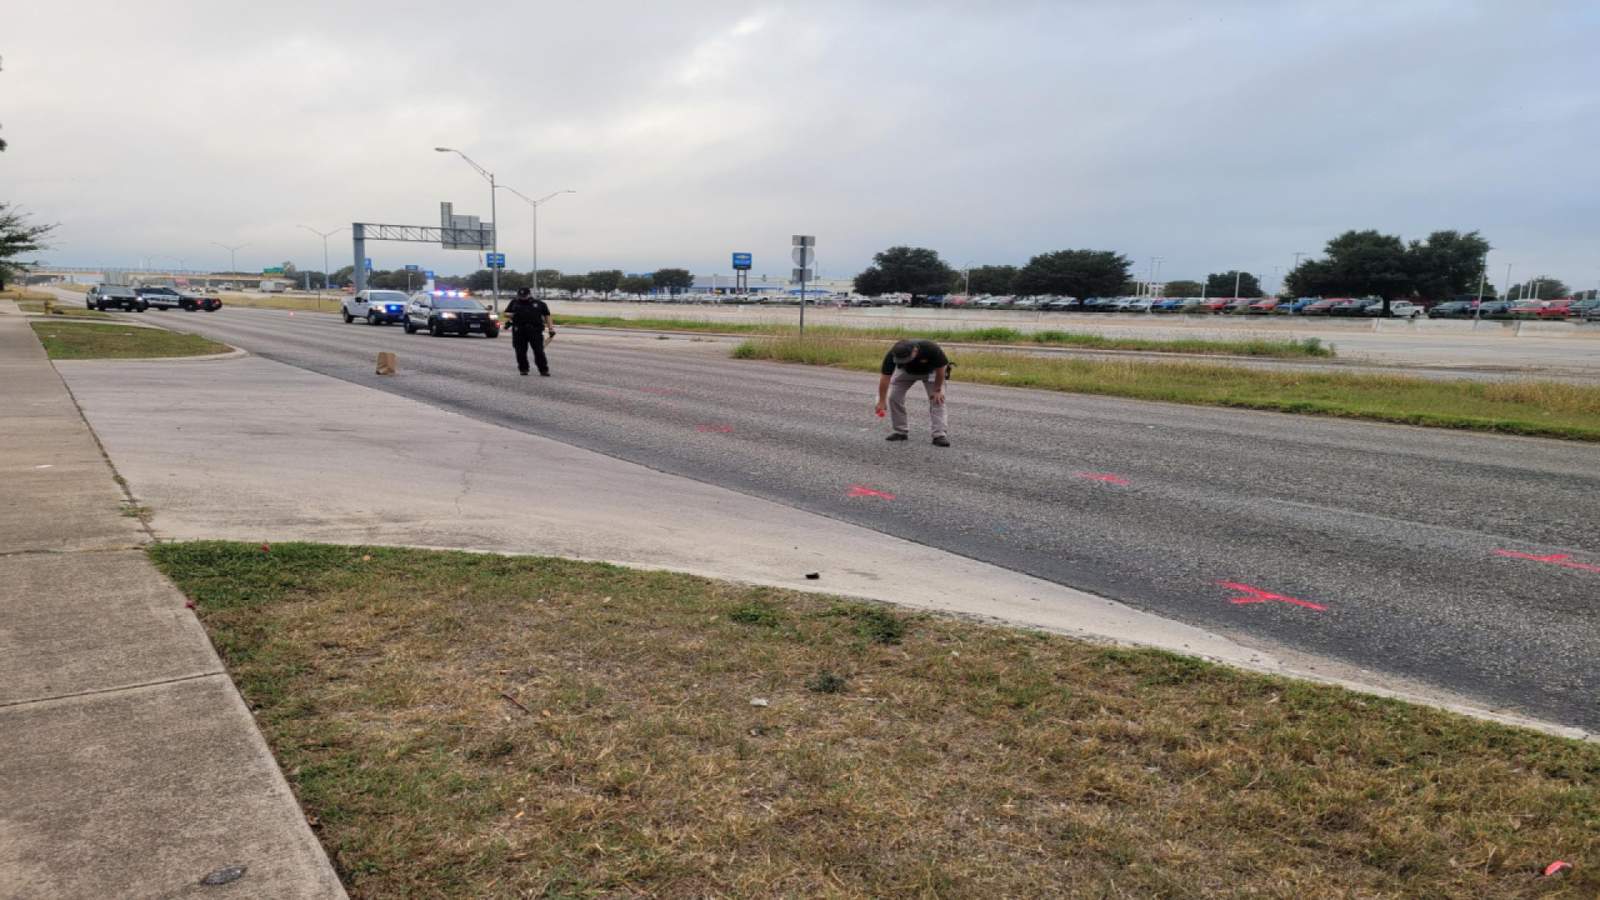 Man walking on access road of I-35 struck by van, police say